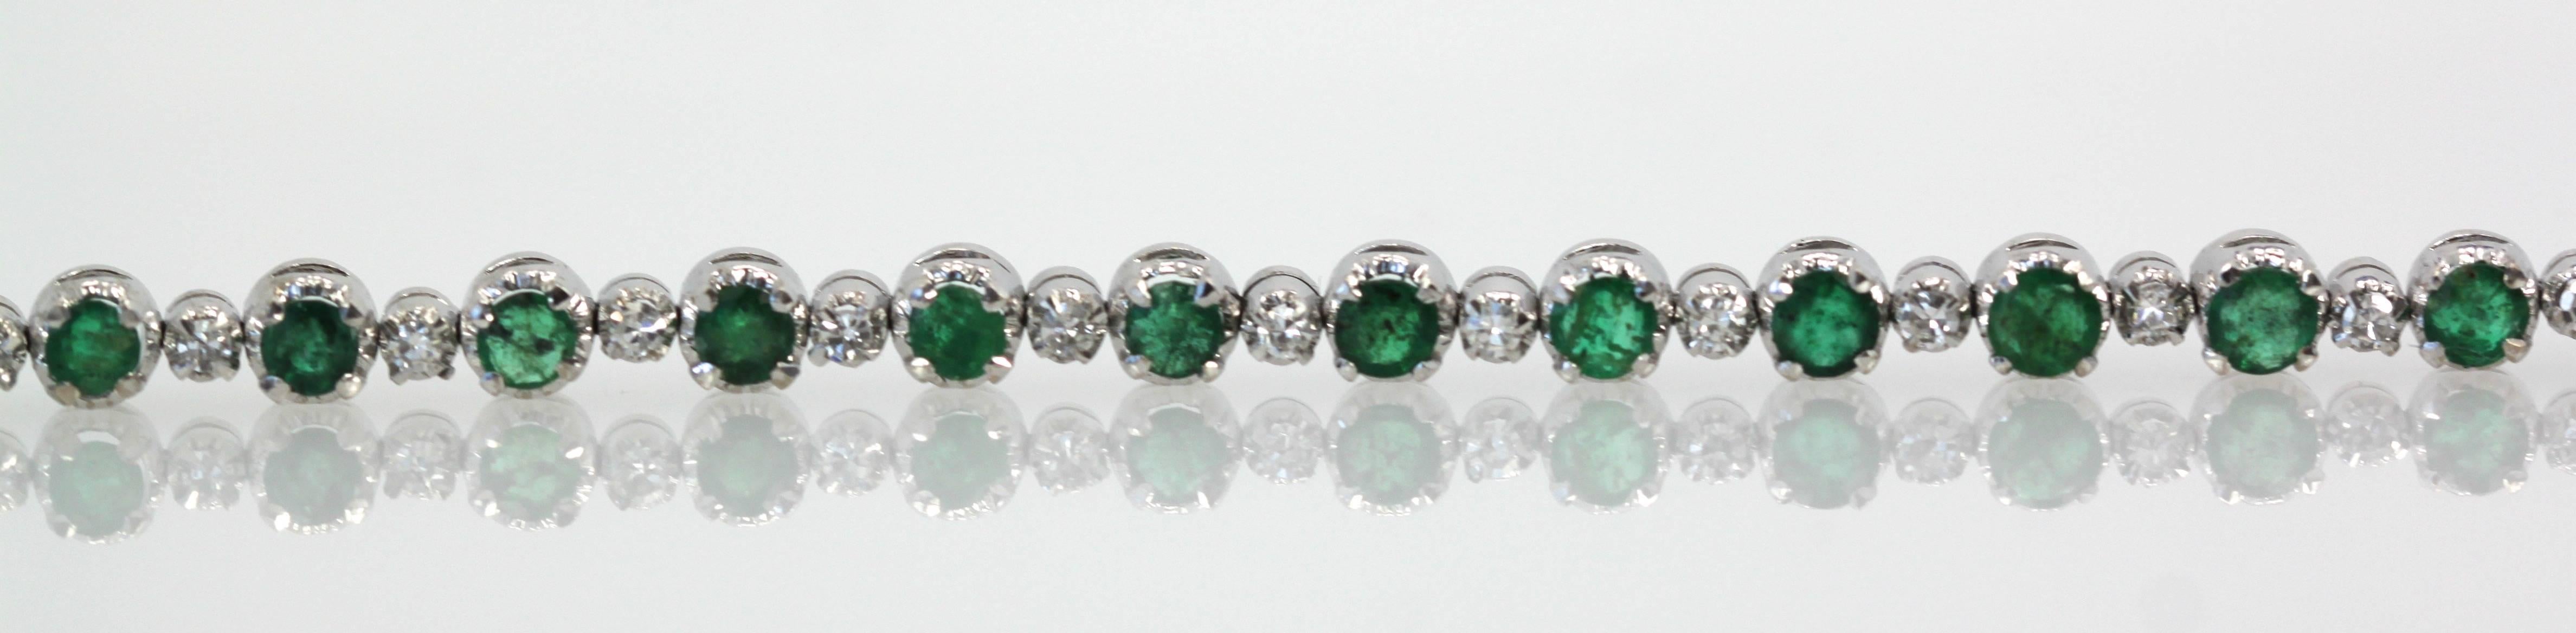 This lovely Emerald and Diamond Bracelet alternates between Emeralds and Diamonds in a filigree bezel setting.  The Emeralds are a gorgeous color green they are natural with visible inclusions.  This bracelet borders the line between vintage and